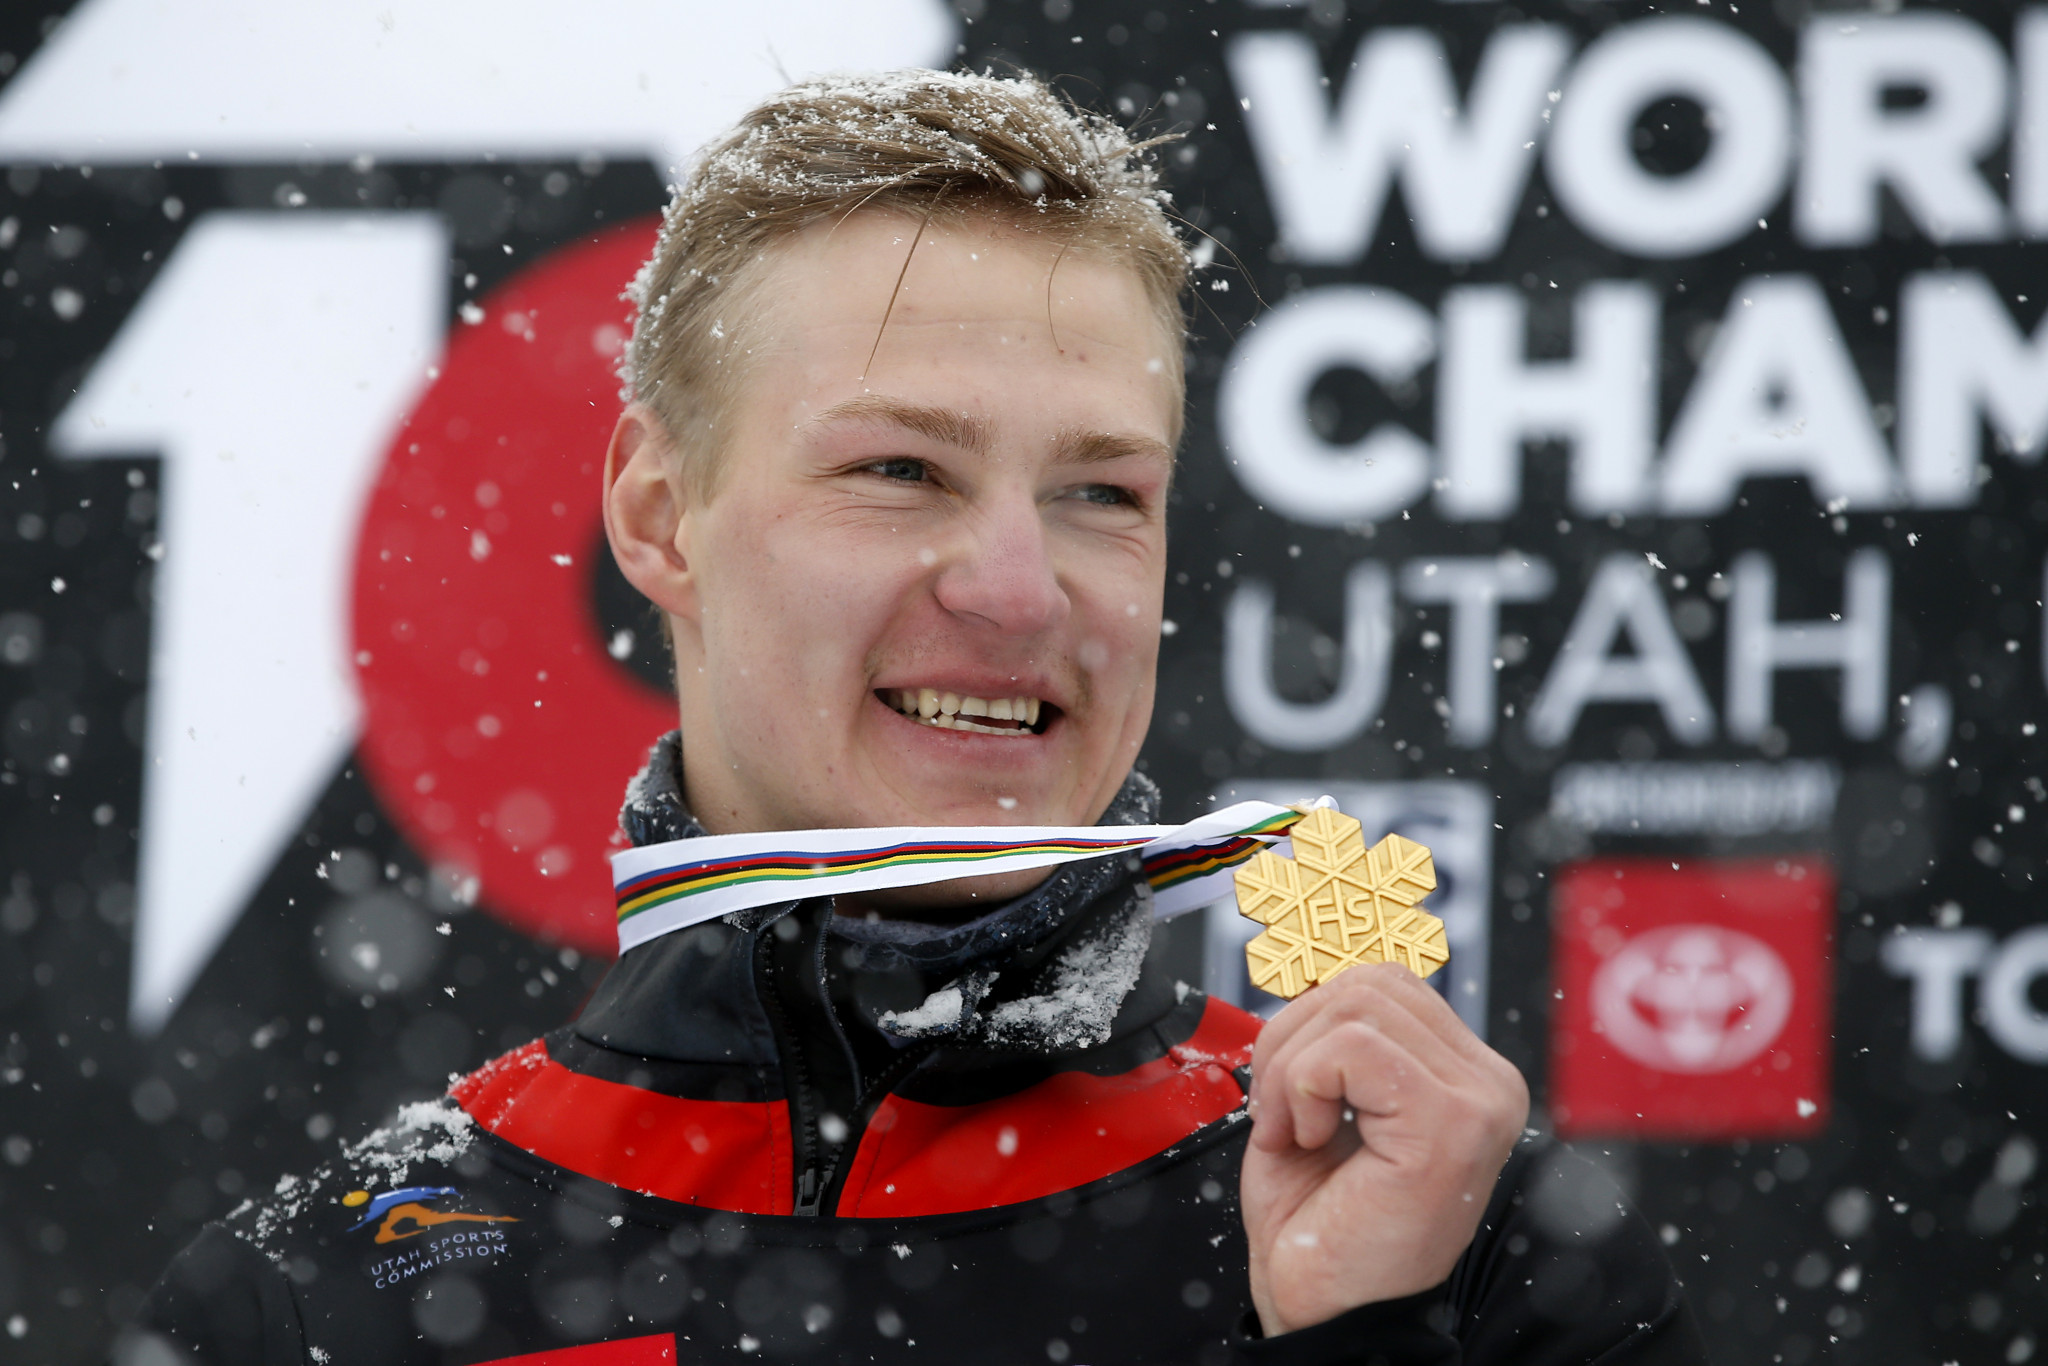 Two-time snowboard world champion Dmitry Loginov will compete for Russia at the Krasnoyarsk 2019 Winter Universiade ©Getty Images